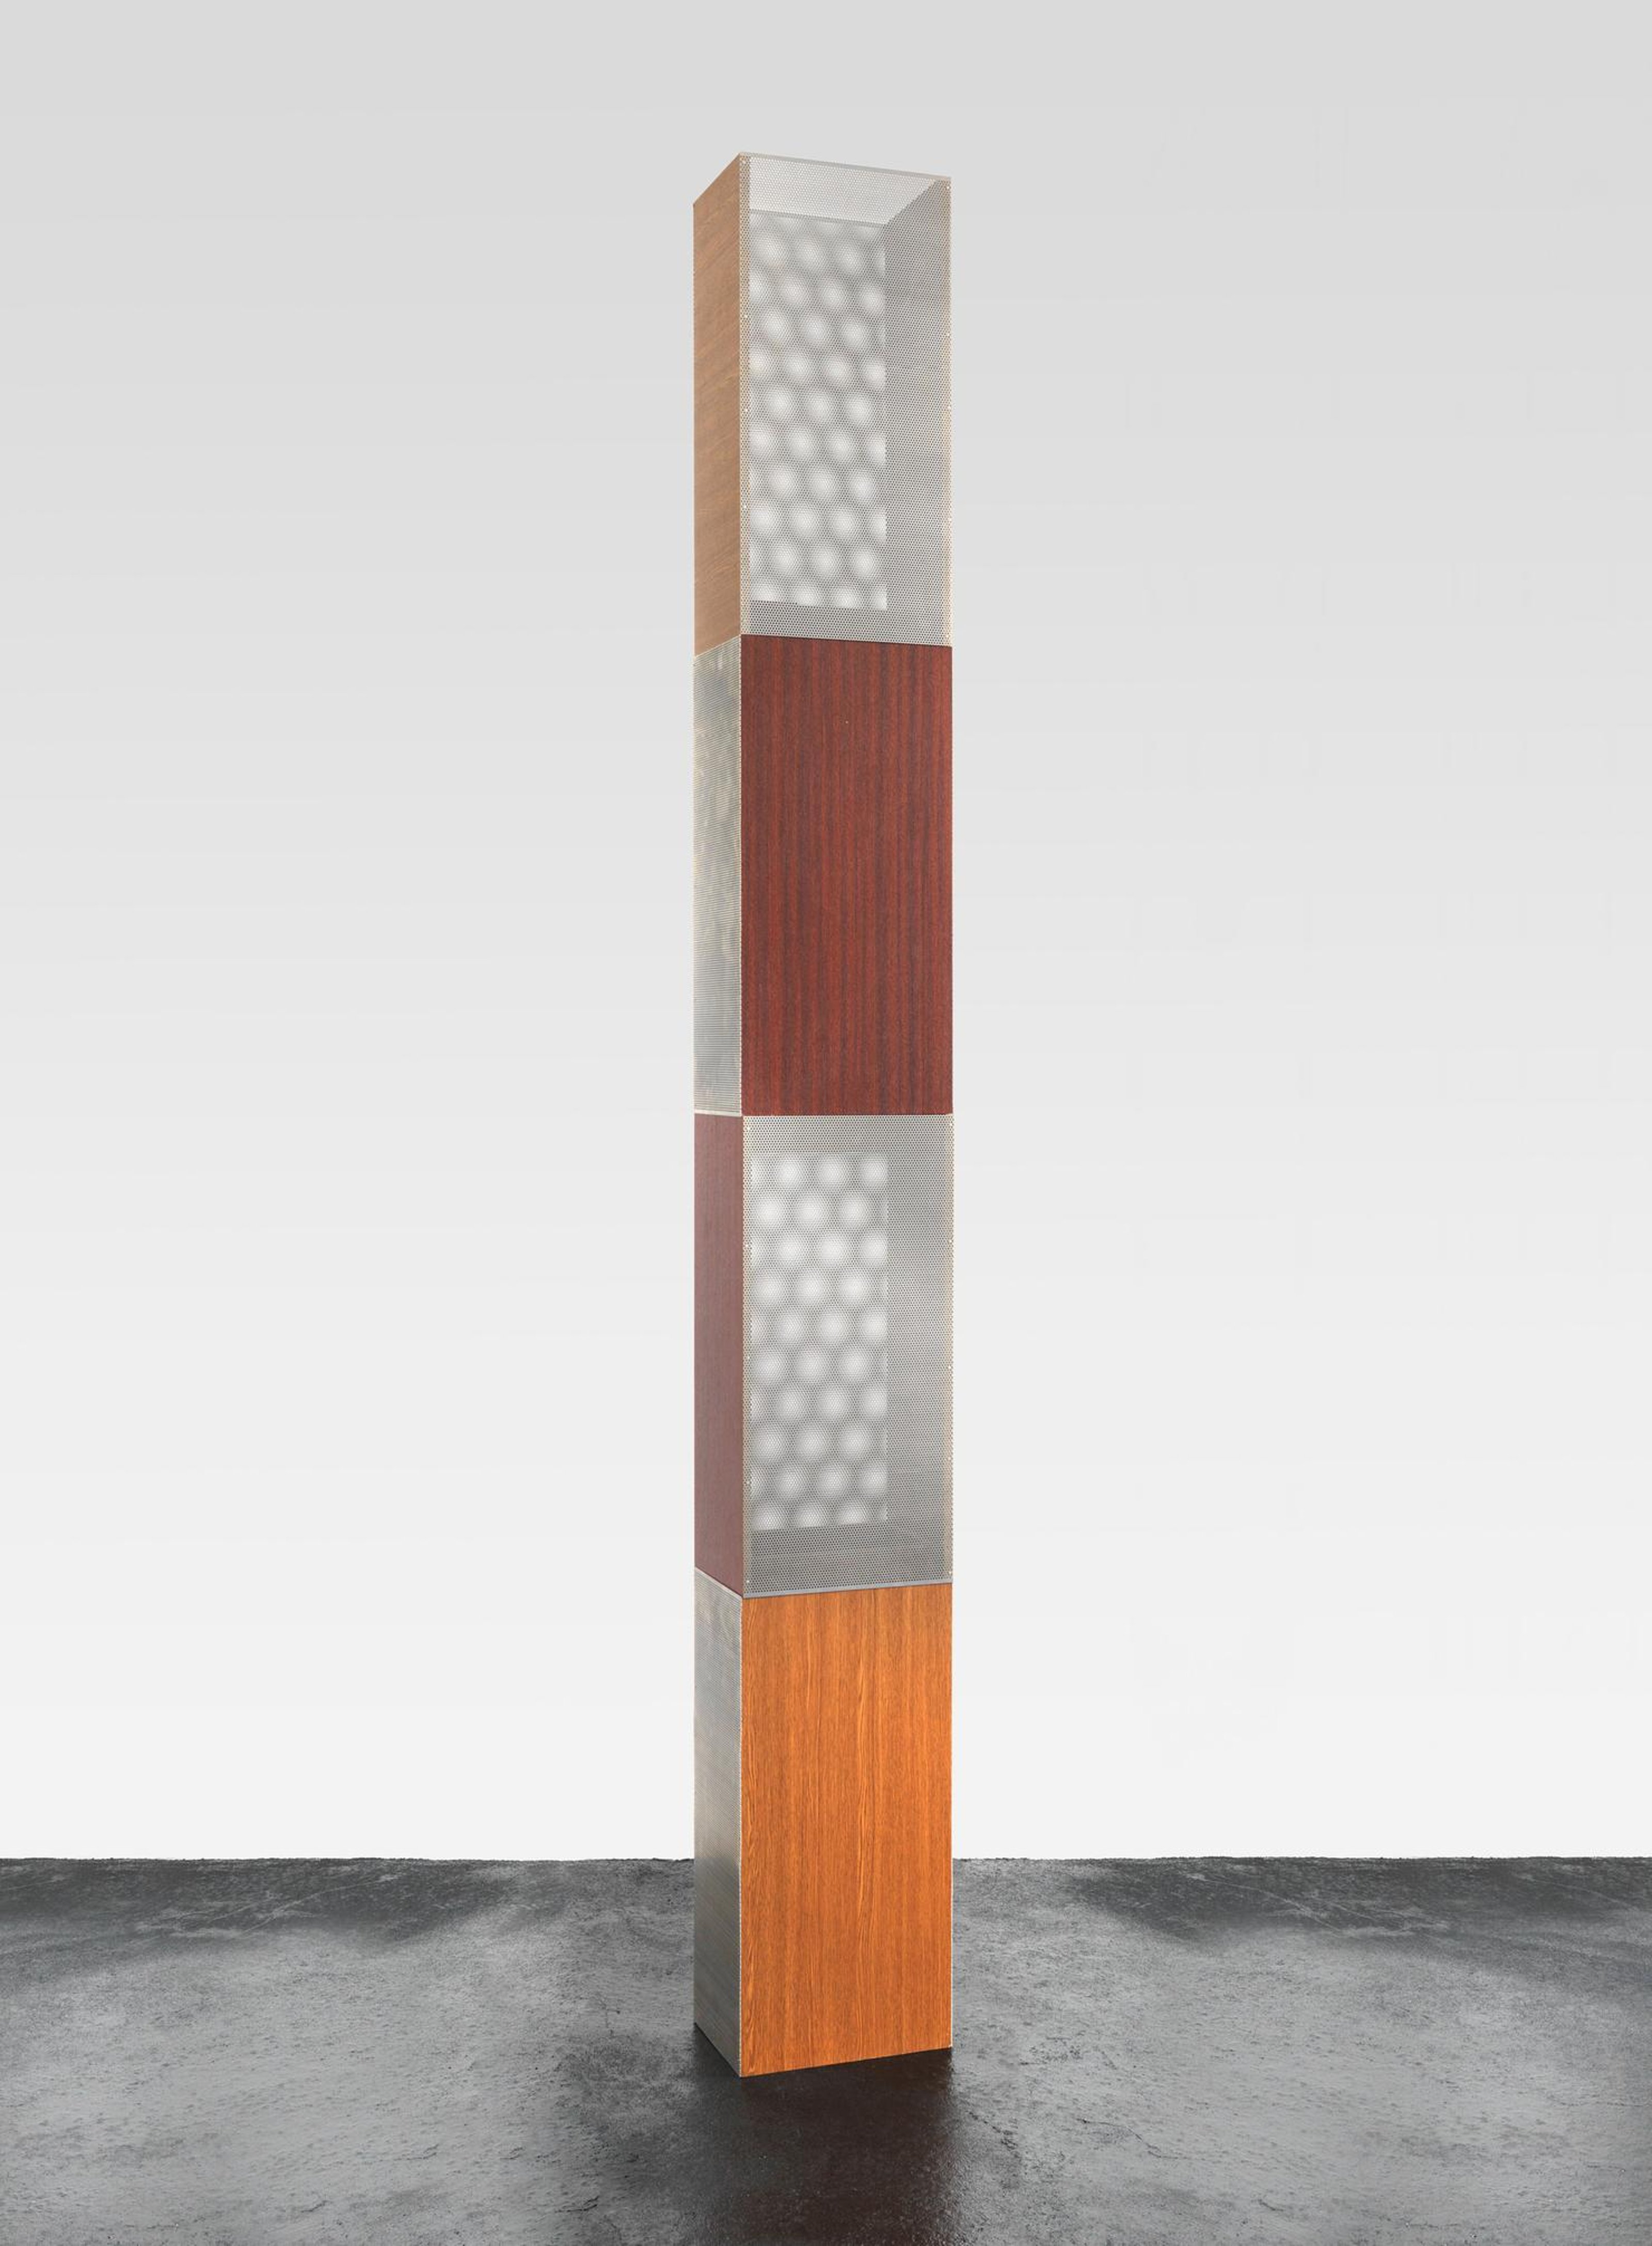 Colored and reflective column sculpture with clear, red and orange colors by Isa Genzken